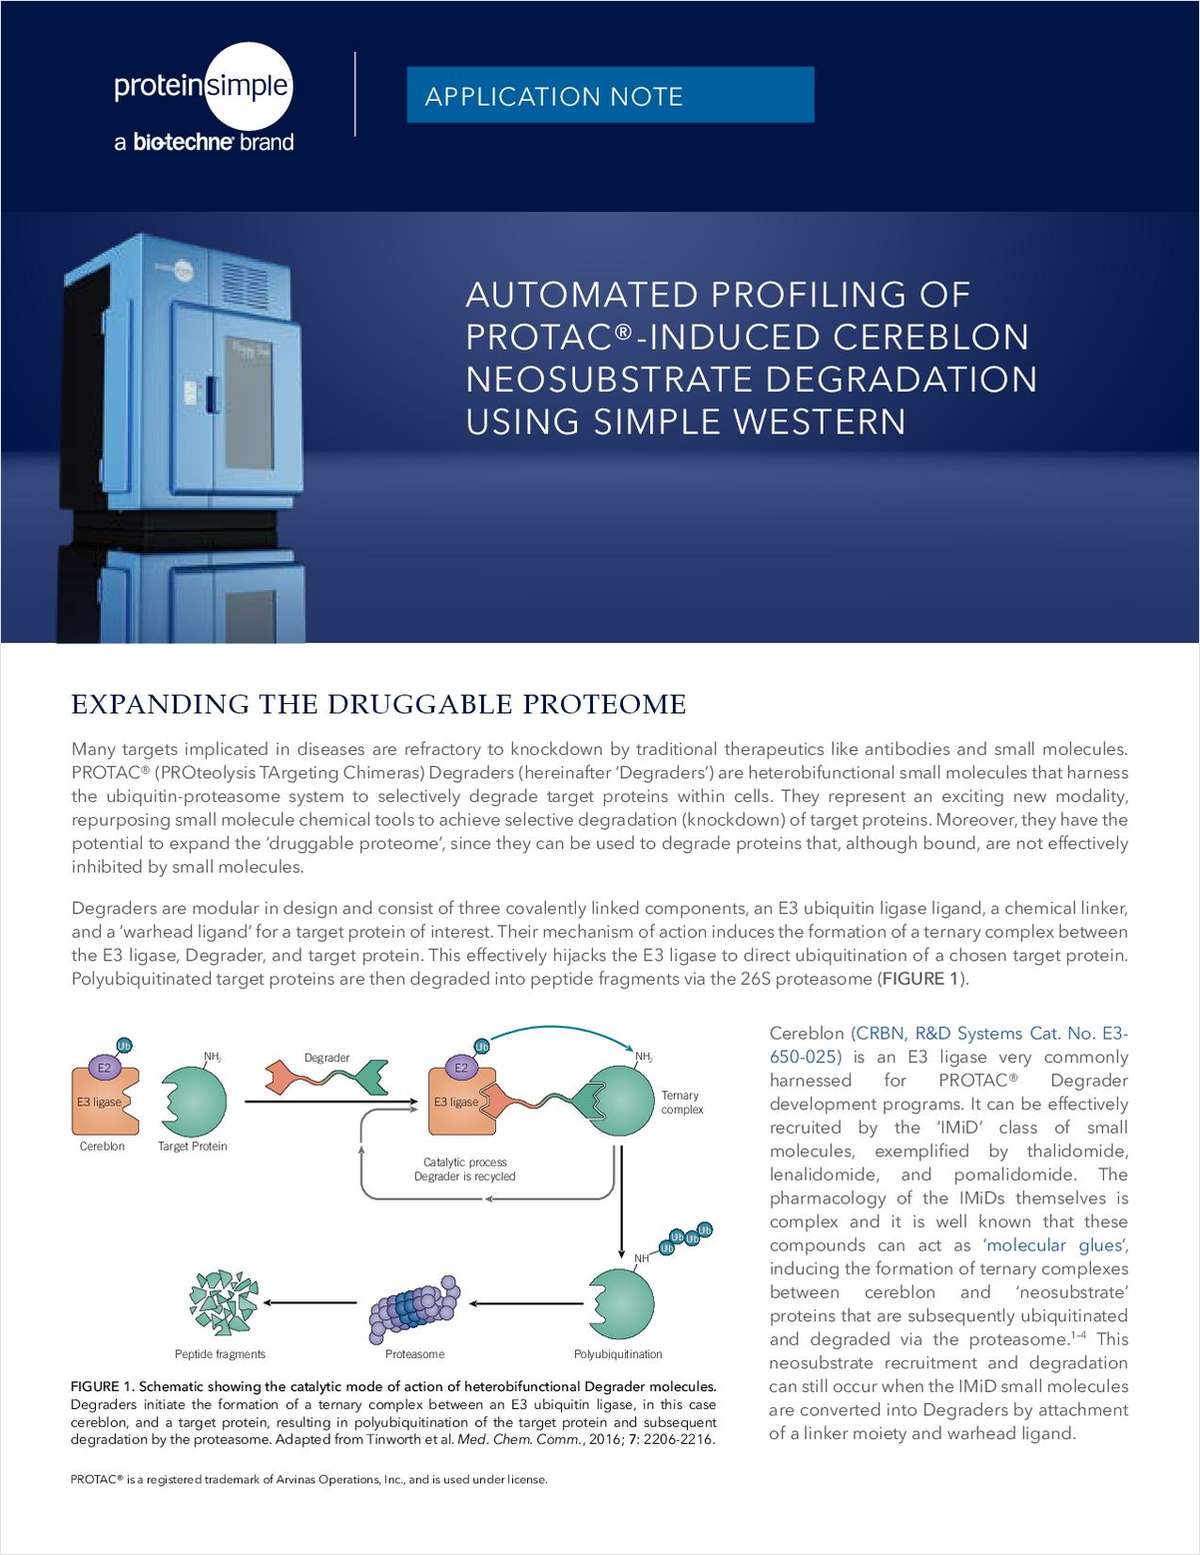 Automated Profiling Of PROTAC-Induced Cereblon Neosubstrate Degradation Using Simple Western